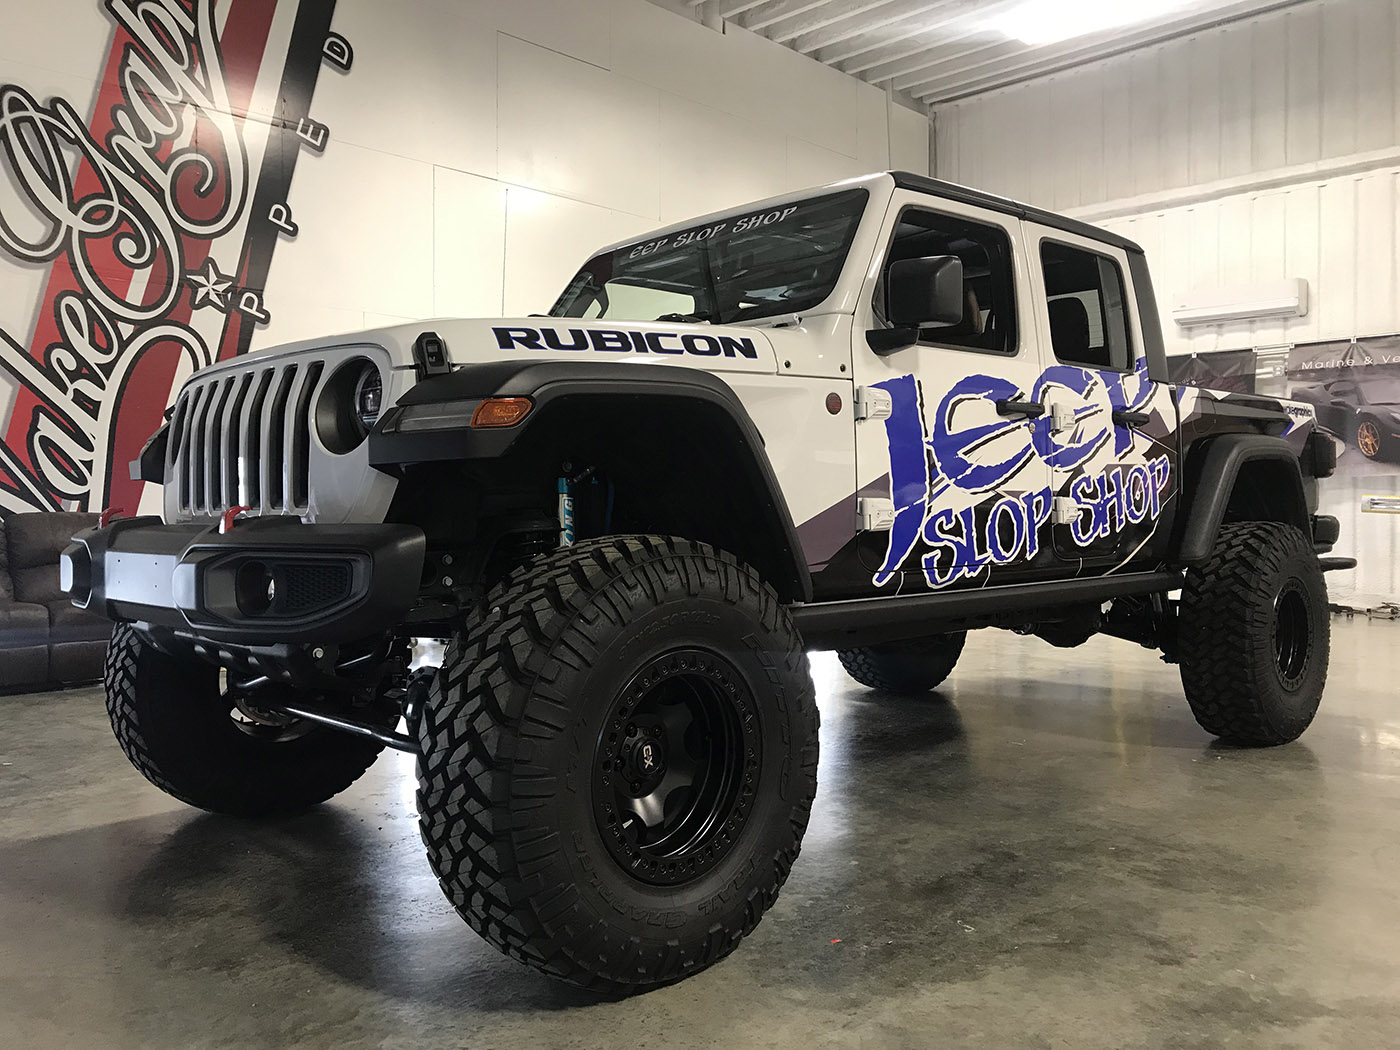 Jeep Gladiator Truck Livery and Graphics Wraps